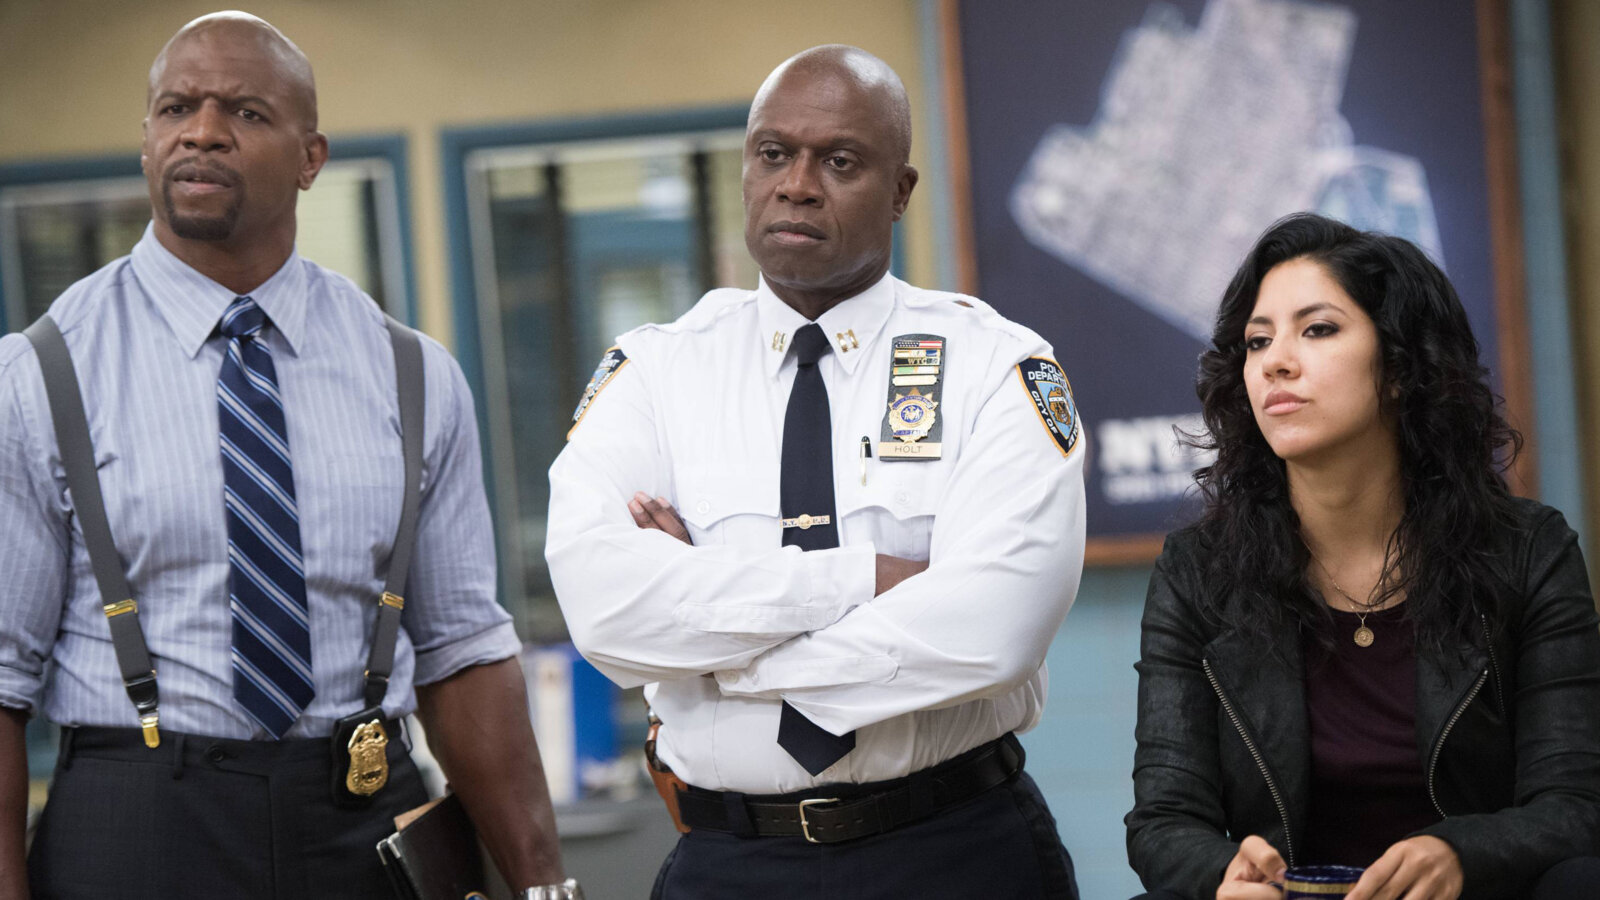 Brooklyn 99 to &#8220;start over&#8221; and rewrite episodes in light of the anti-racism protests, The Manc